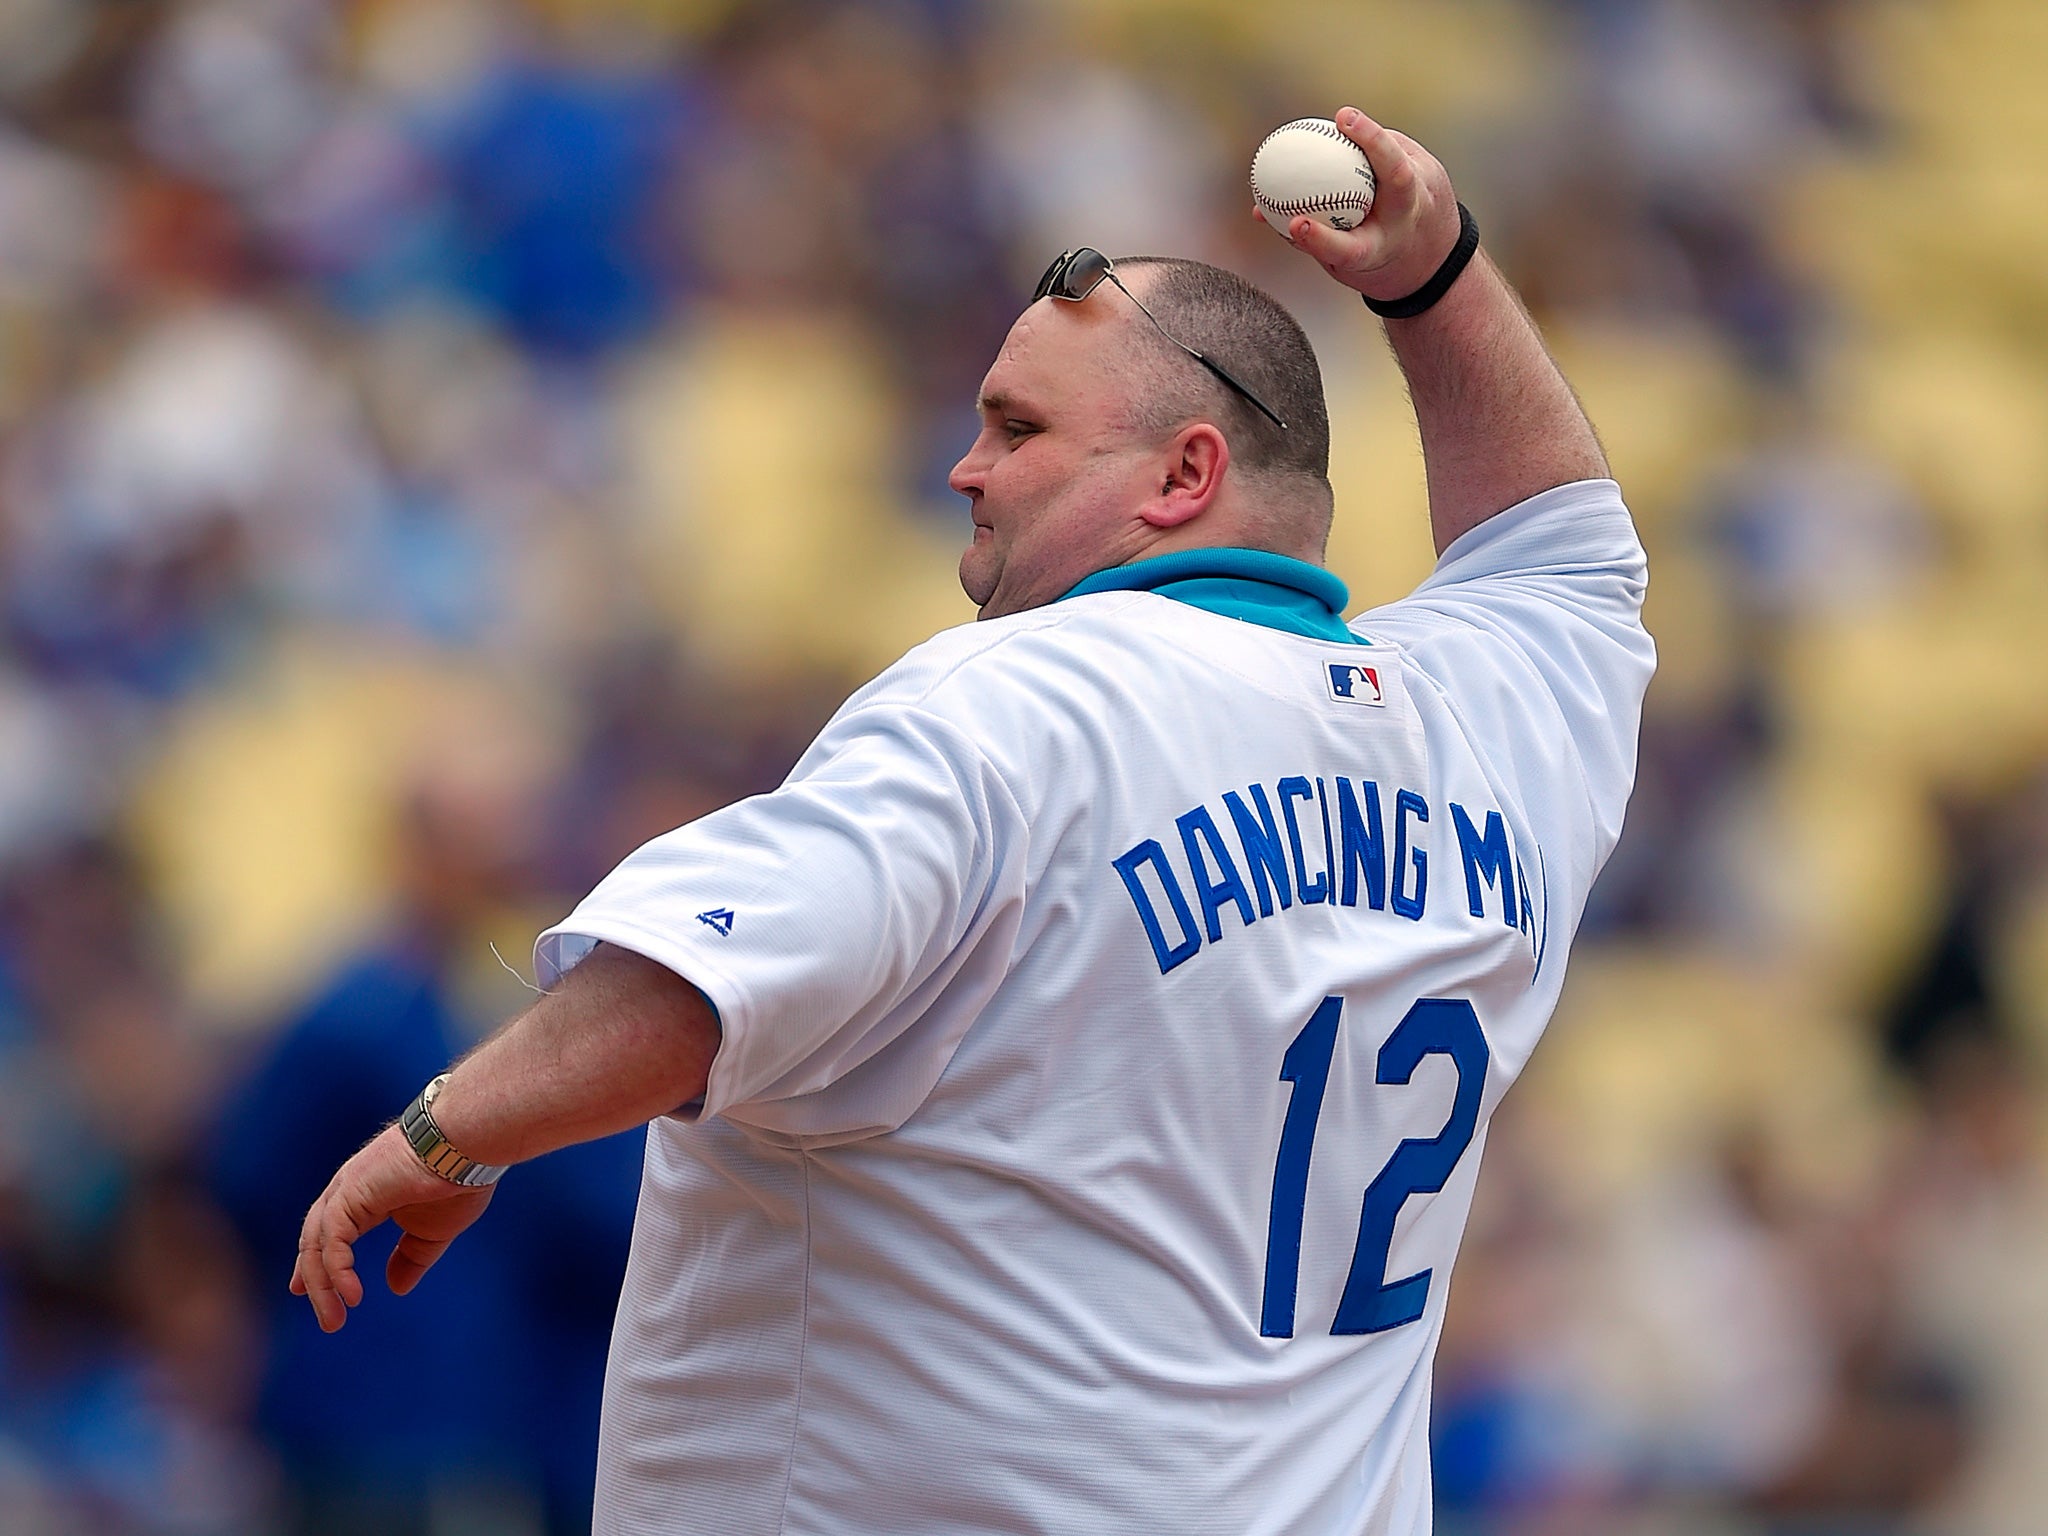 Sean O'Brien, "The Dancing Man," throws the ceremonial first pitch prior to a baseball game between the Los Angeles Dodgers and the San Diego Padres in May